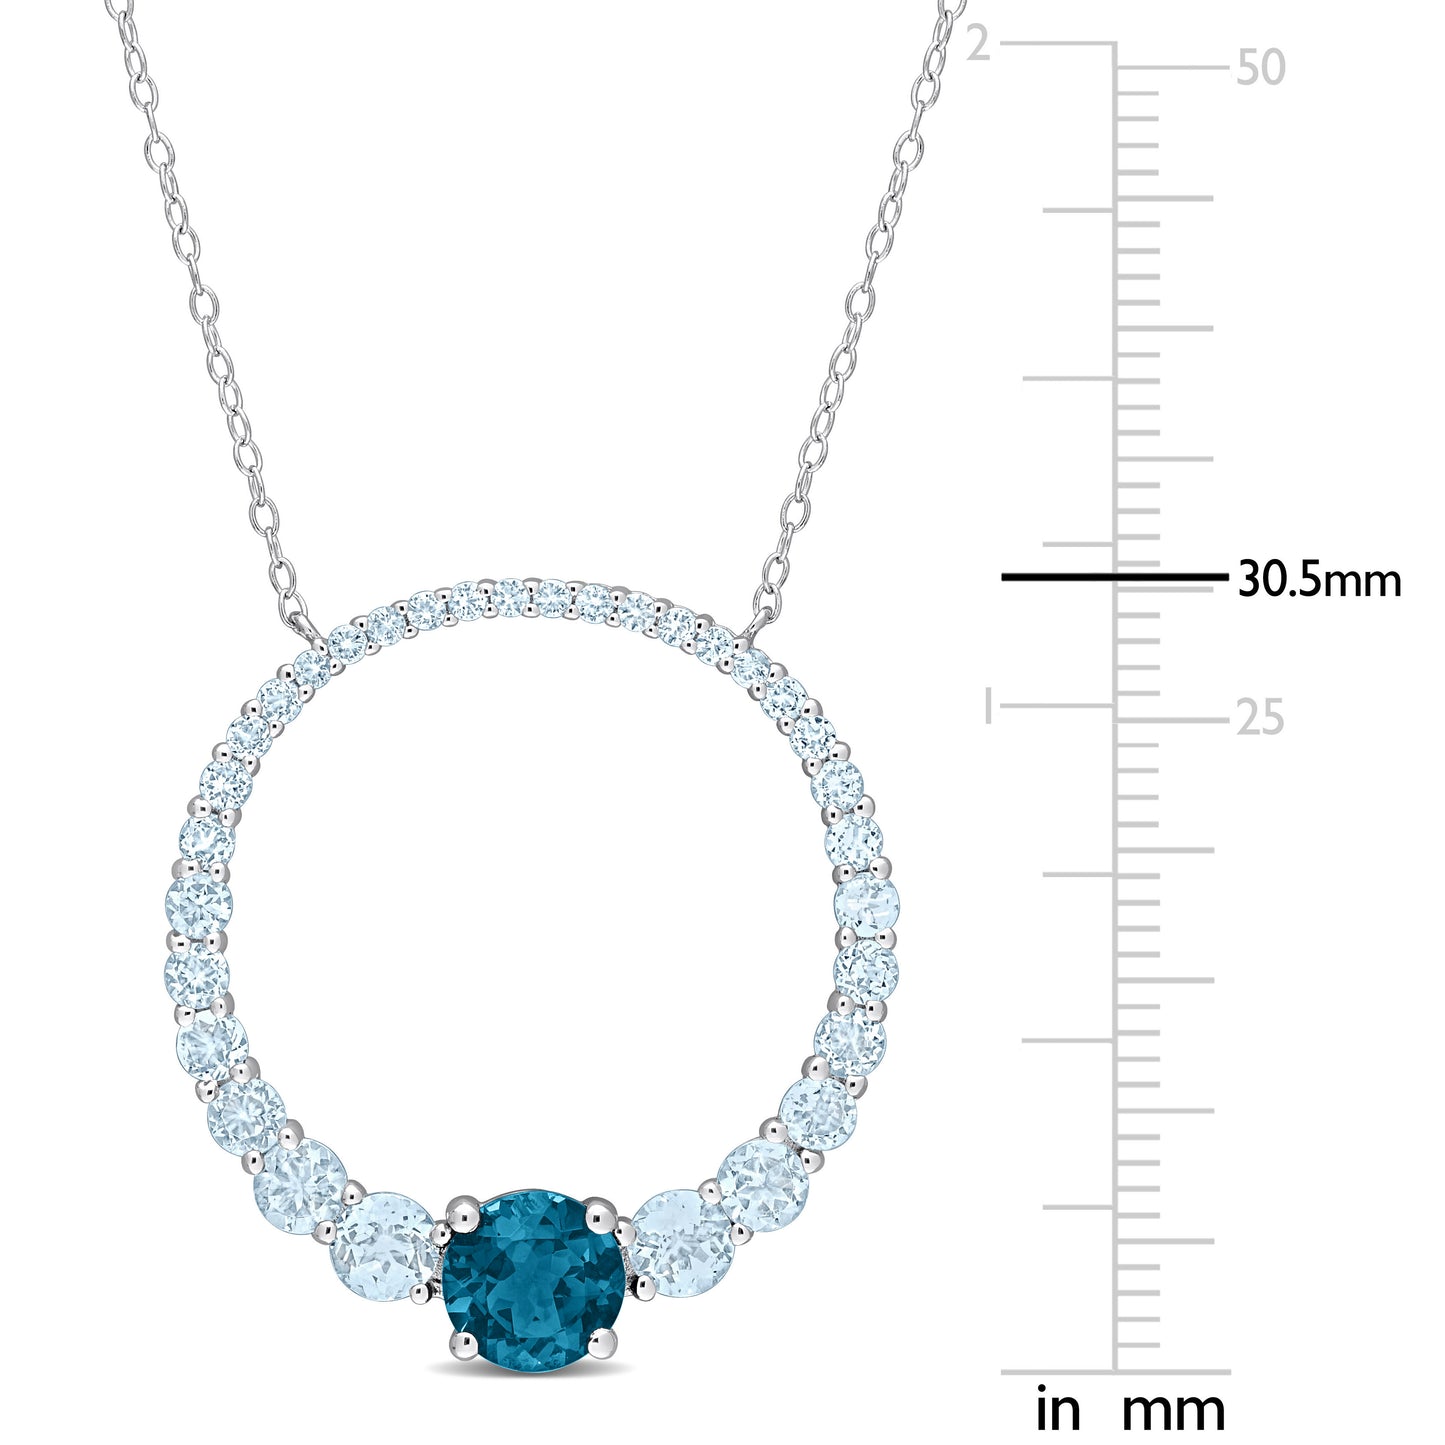 3 7/8ct Blue Topaz Circle Necklace in Sterling Silver